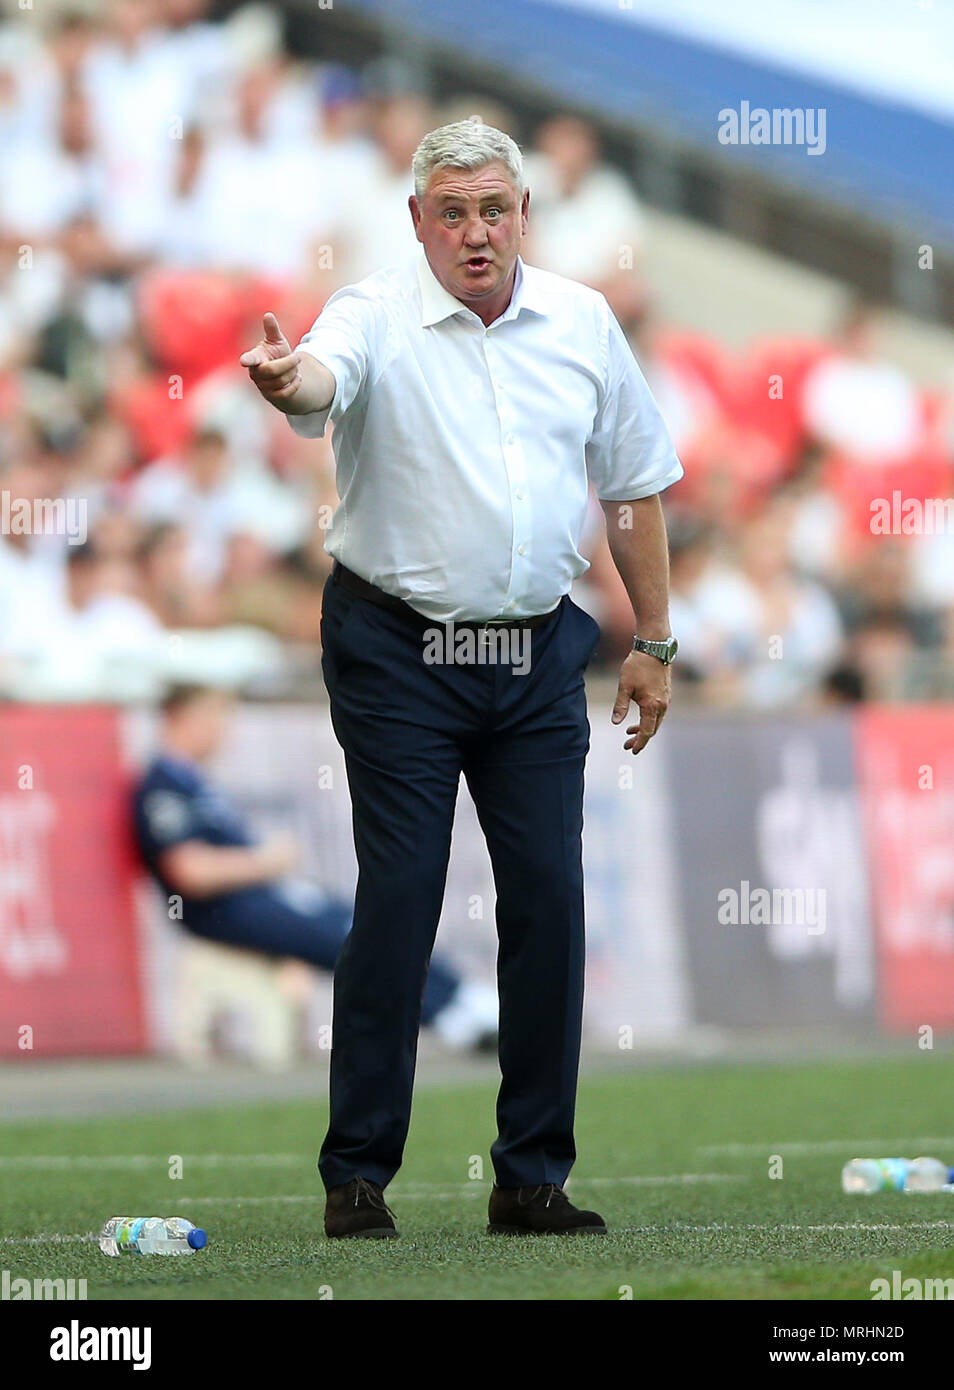 Aston Villa manager Steve Bruce gestures on the touchline during the Sky Bet Championship Final at Wembley Stadium, London. PRESS ASSOCIATION Photo. Picture date: Saturday May 26, 2018. See PA story SOCCER Championship. Photo credit should read: Nigel French/PA Wire. RESTRICTIONS: No use with unauthorised audio, video, data, fixture lists, club/league logos or 'live' services. Online in-match use limited to 75 images, no video emulation. No use in betting, games or single club/league/player publications Stock Photo